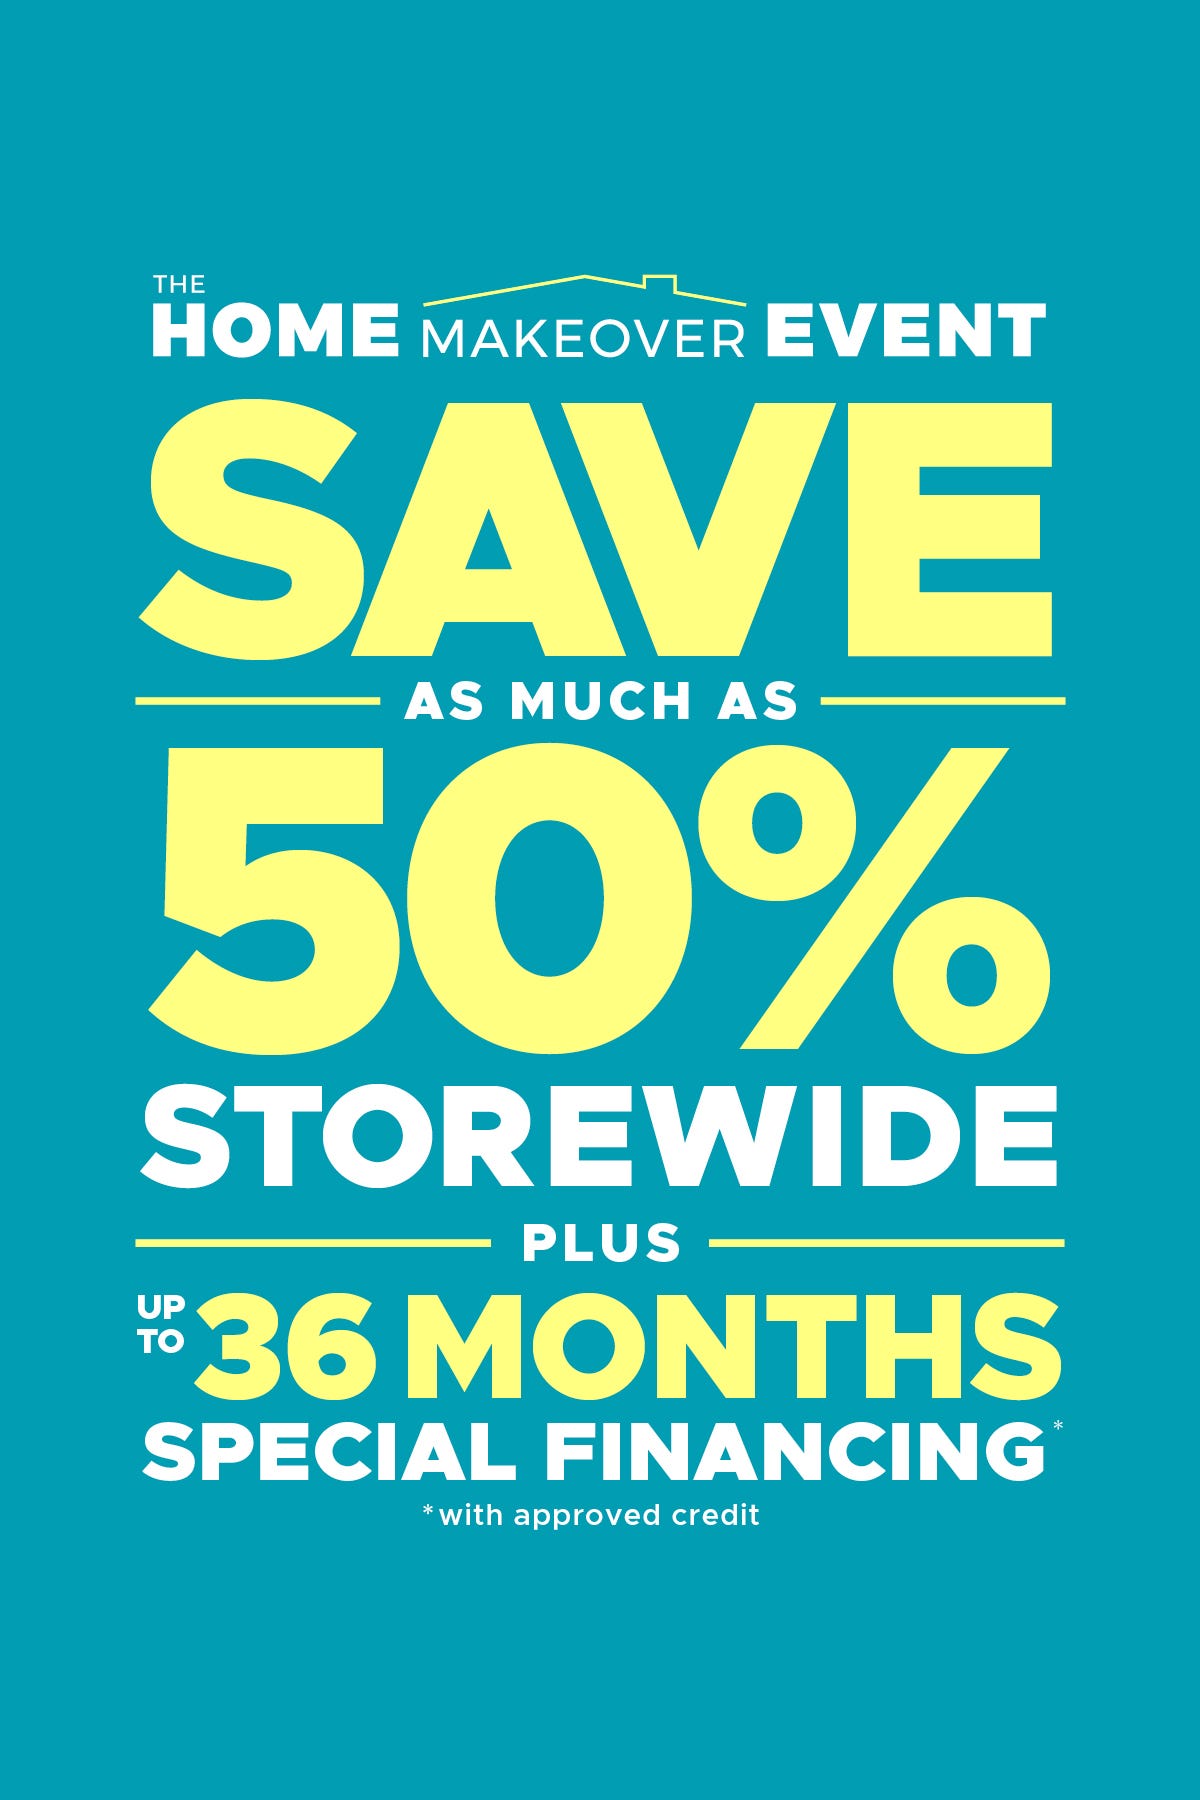 The home makeover event. Save as much as 50% storewide. Plus up to 36 months special financing. With approved credit.